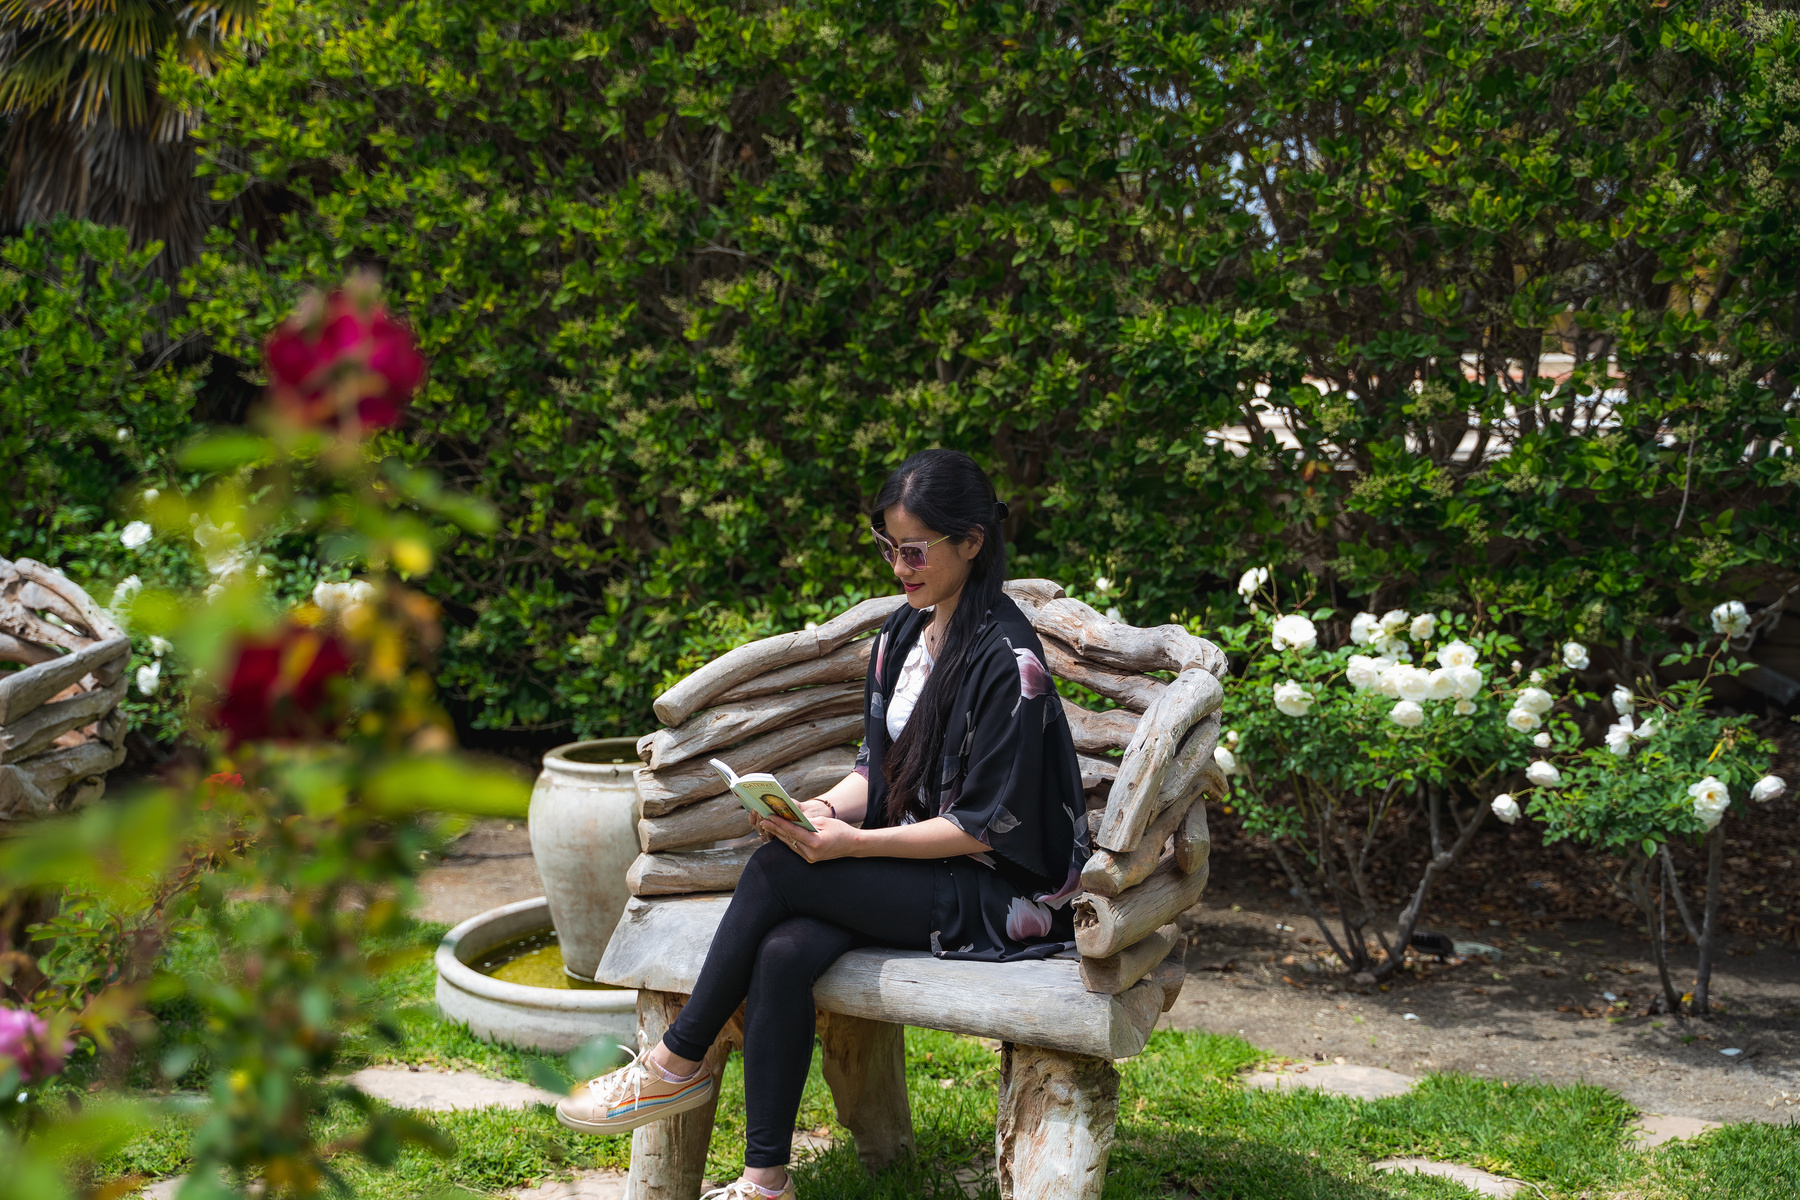 A woman with long dark hair, sunglasses dark clothing, a white top, and pink shoes sitting on a wooden chair reading a book in a garden